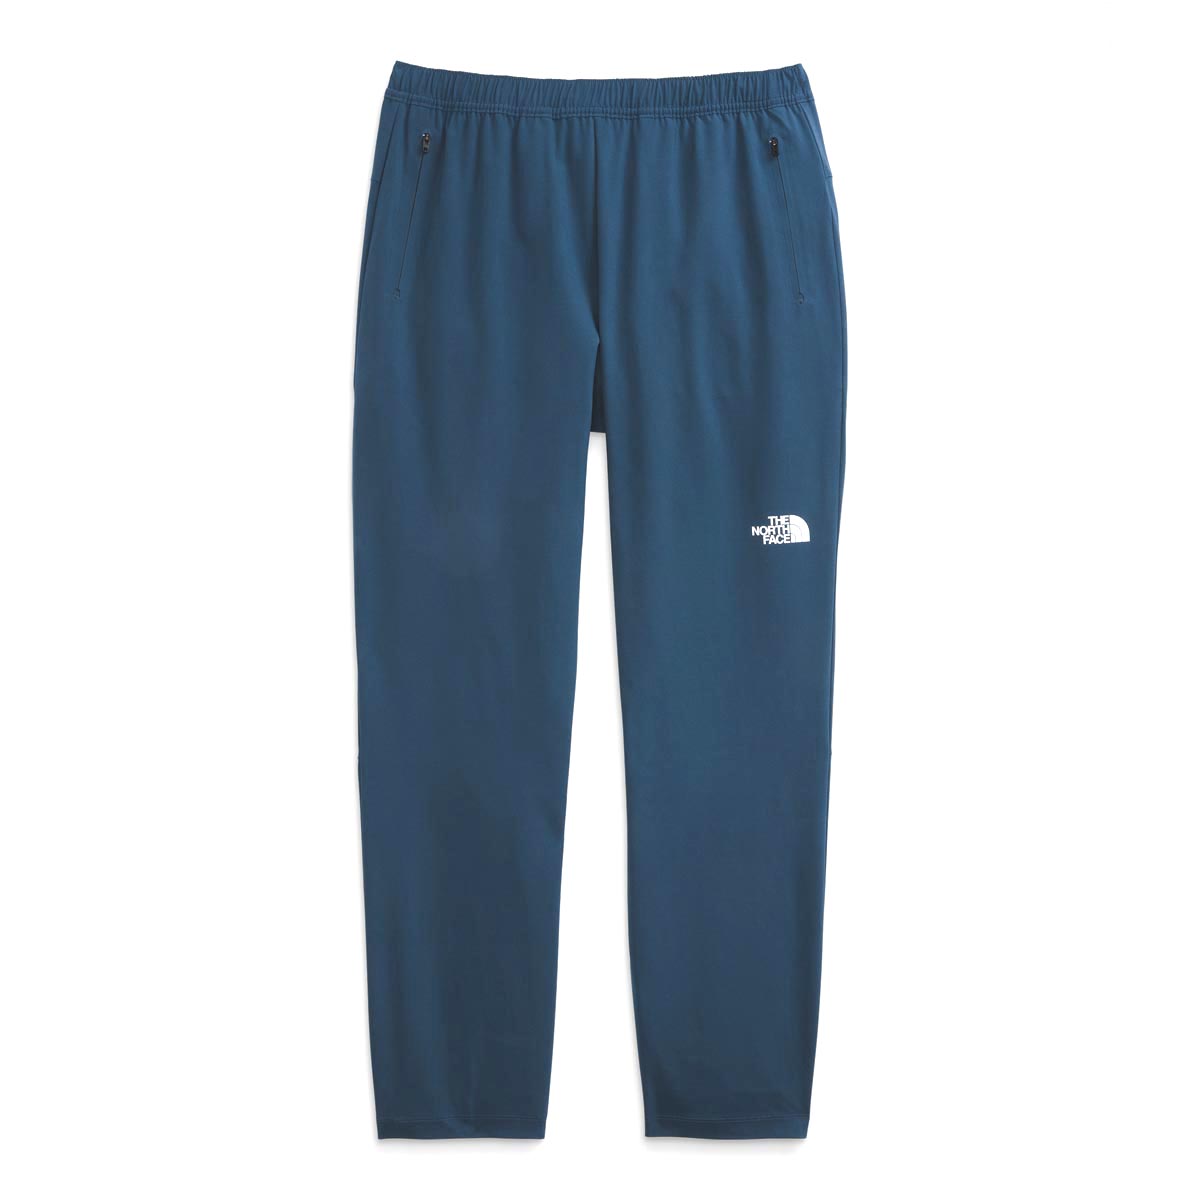 The North Face Men's Door to Trail Jogger